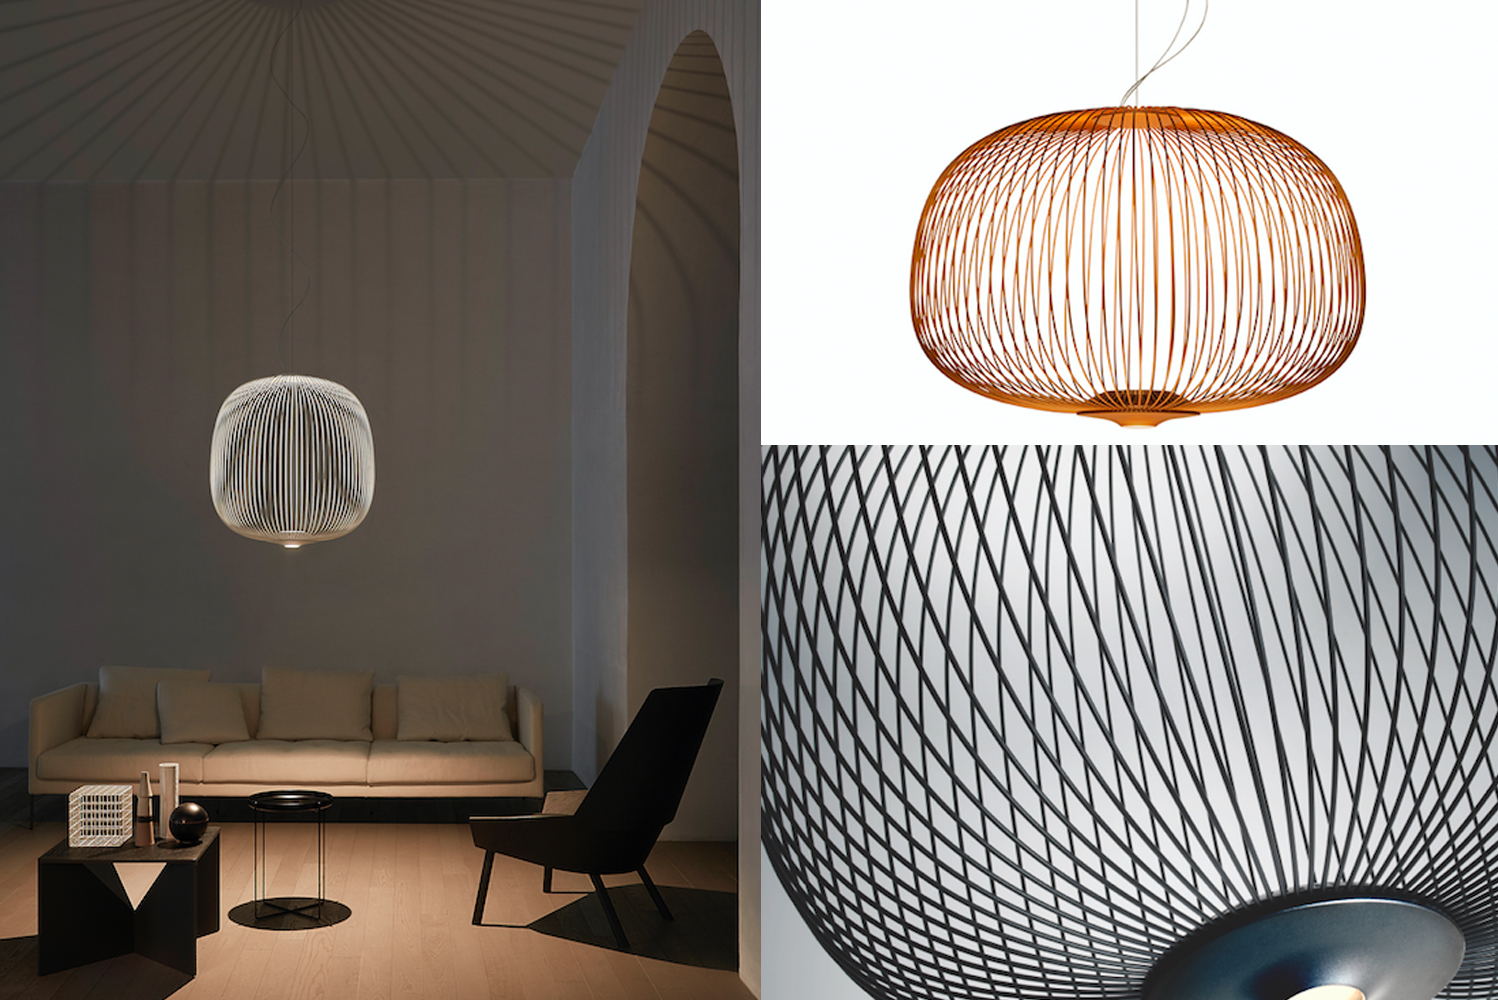 With a conceptual and utilitarian design by Garcia Cumini the silhouette of Spokes evokes that of a birdcage or a lantern 